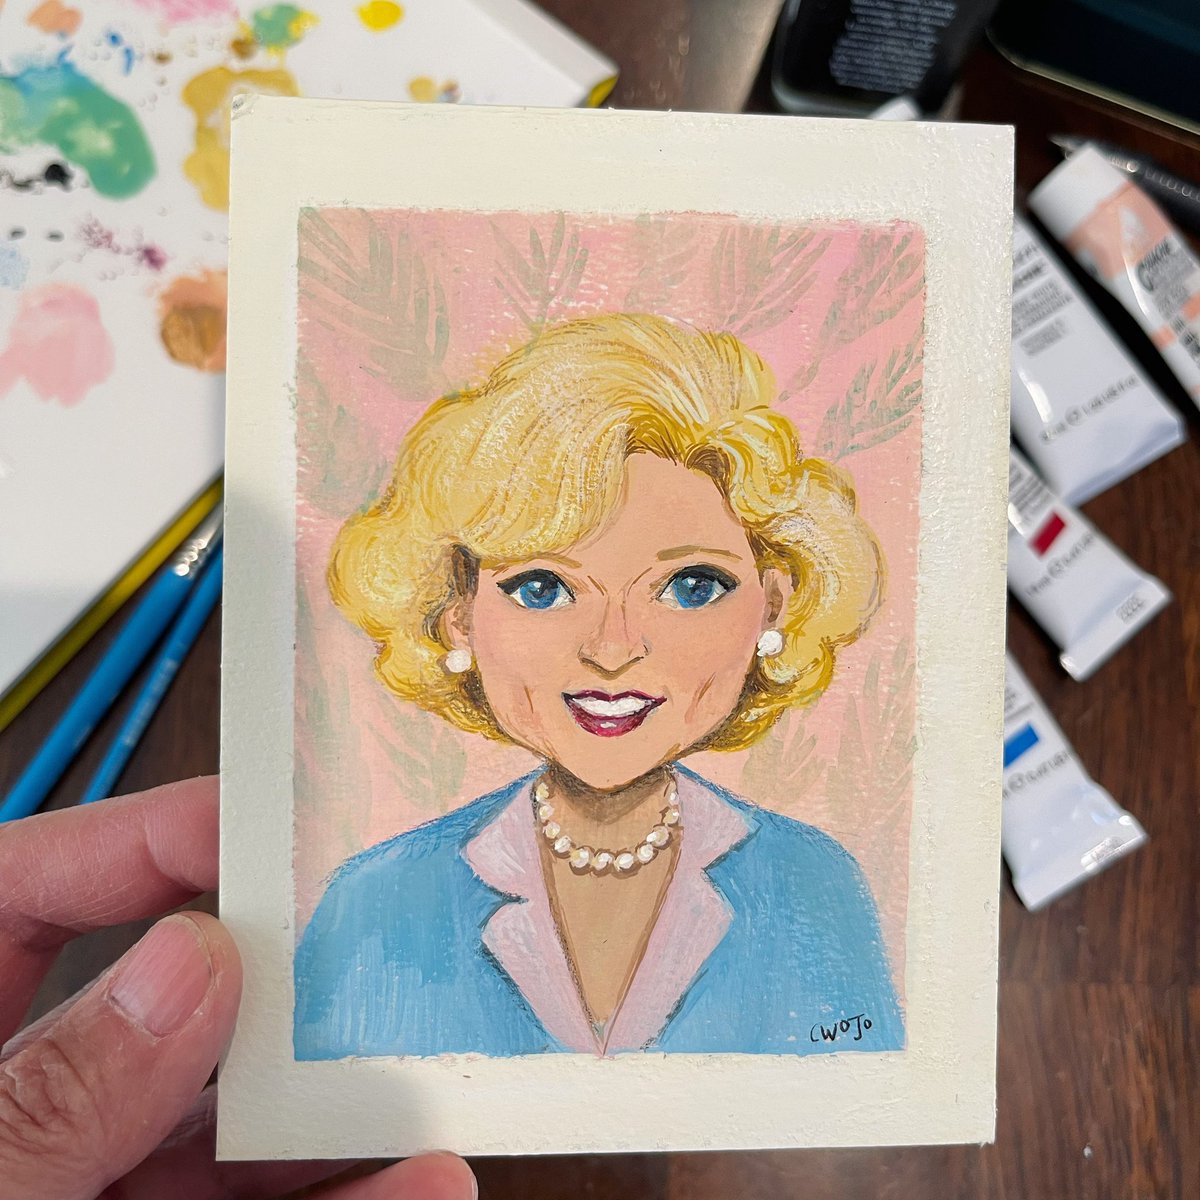 “My mother always used to say: 'The older you get, the better you get, unless you're a banana.' .😂 #goldengirls #ArtistOnTwitter #thankyouforbeingafriend #illustration #painting